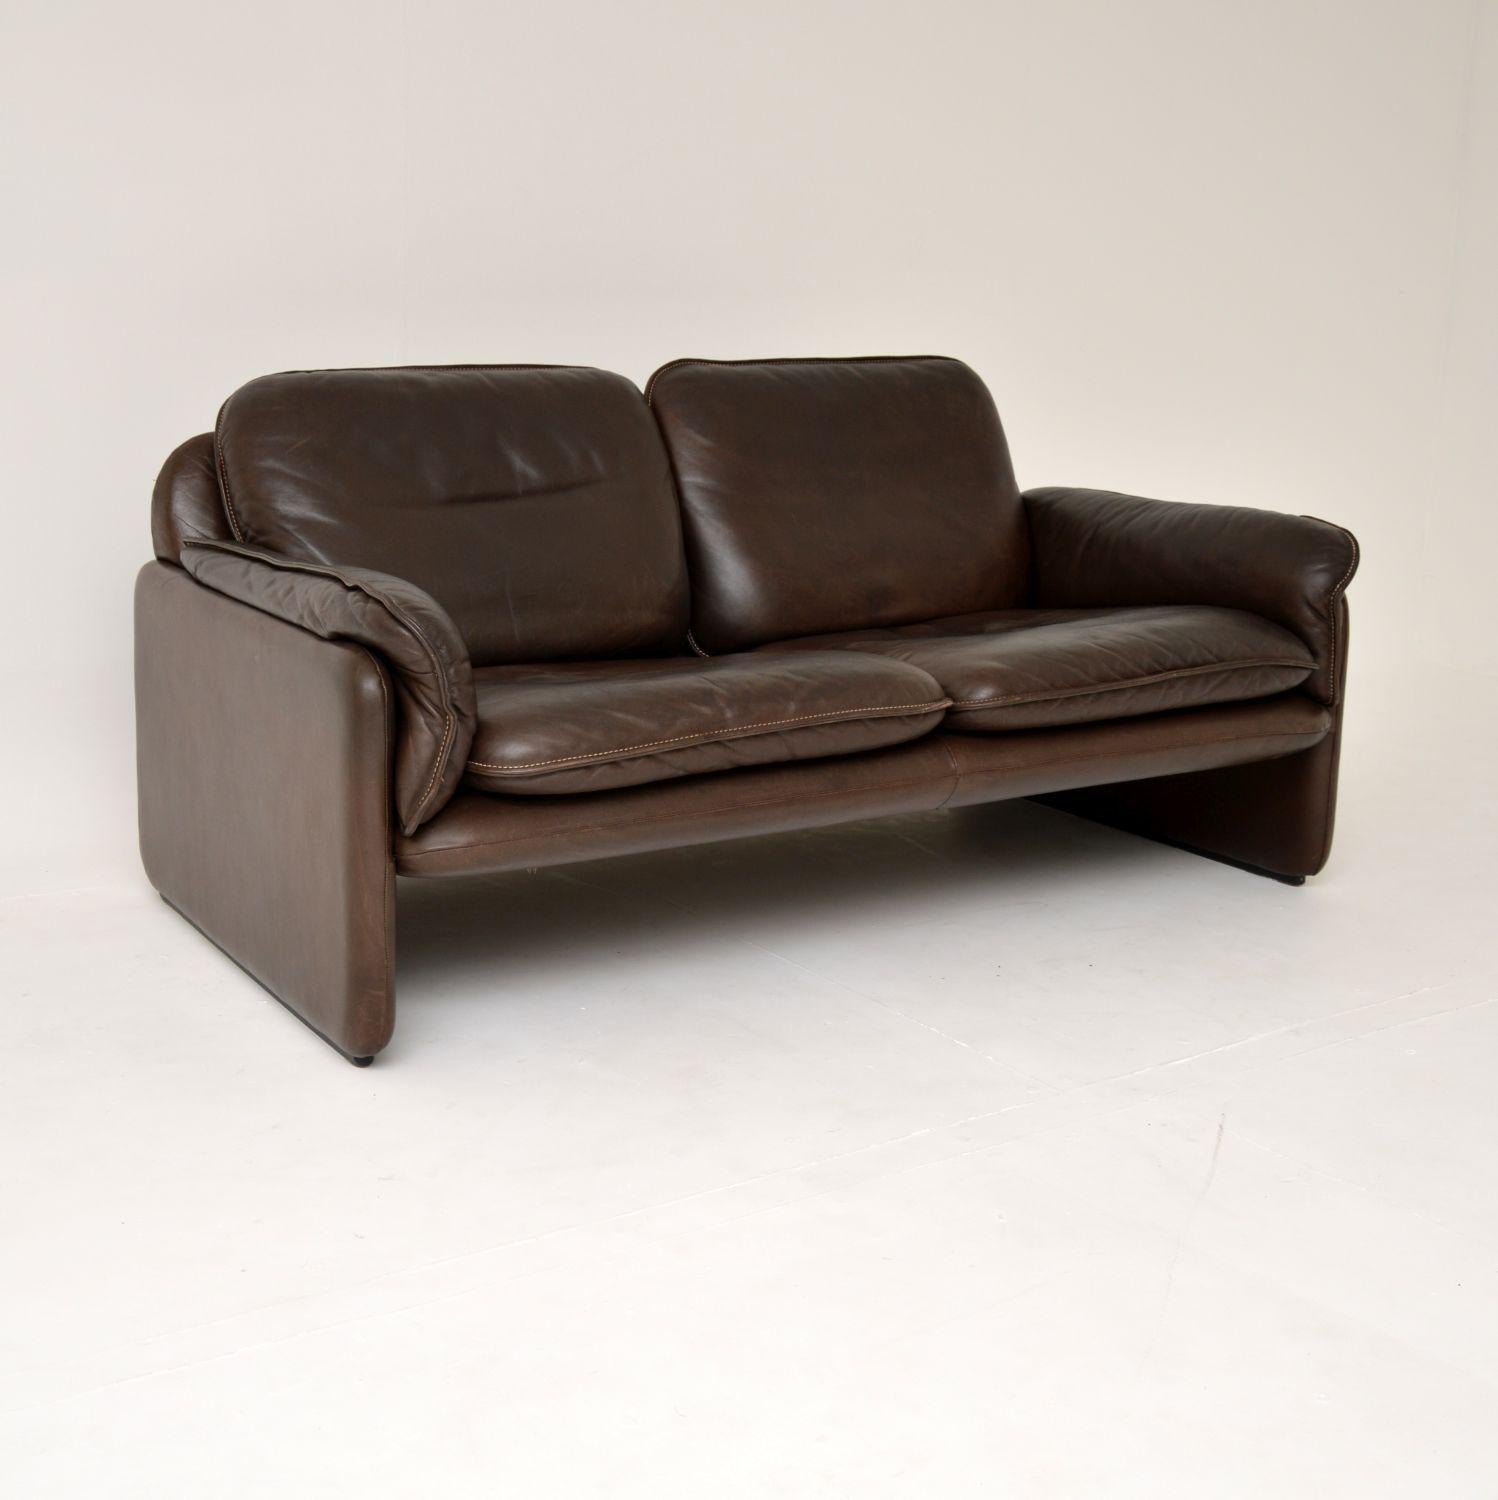 A stylish, very comfortable and extremely well made two seat leather sofa by De Sede. This is the model DS 61, it was made in Switzerland and dates from the 1960-70’s.

As with all De Sede furniture, the quality is outstanding. The brown leather